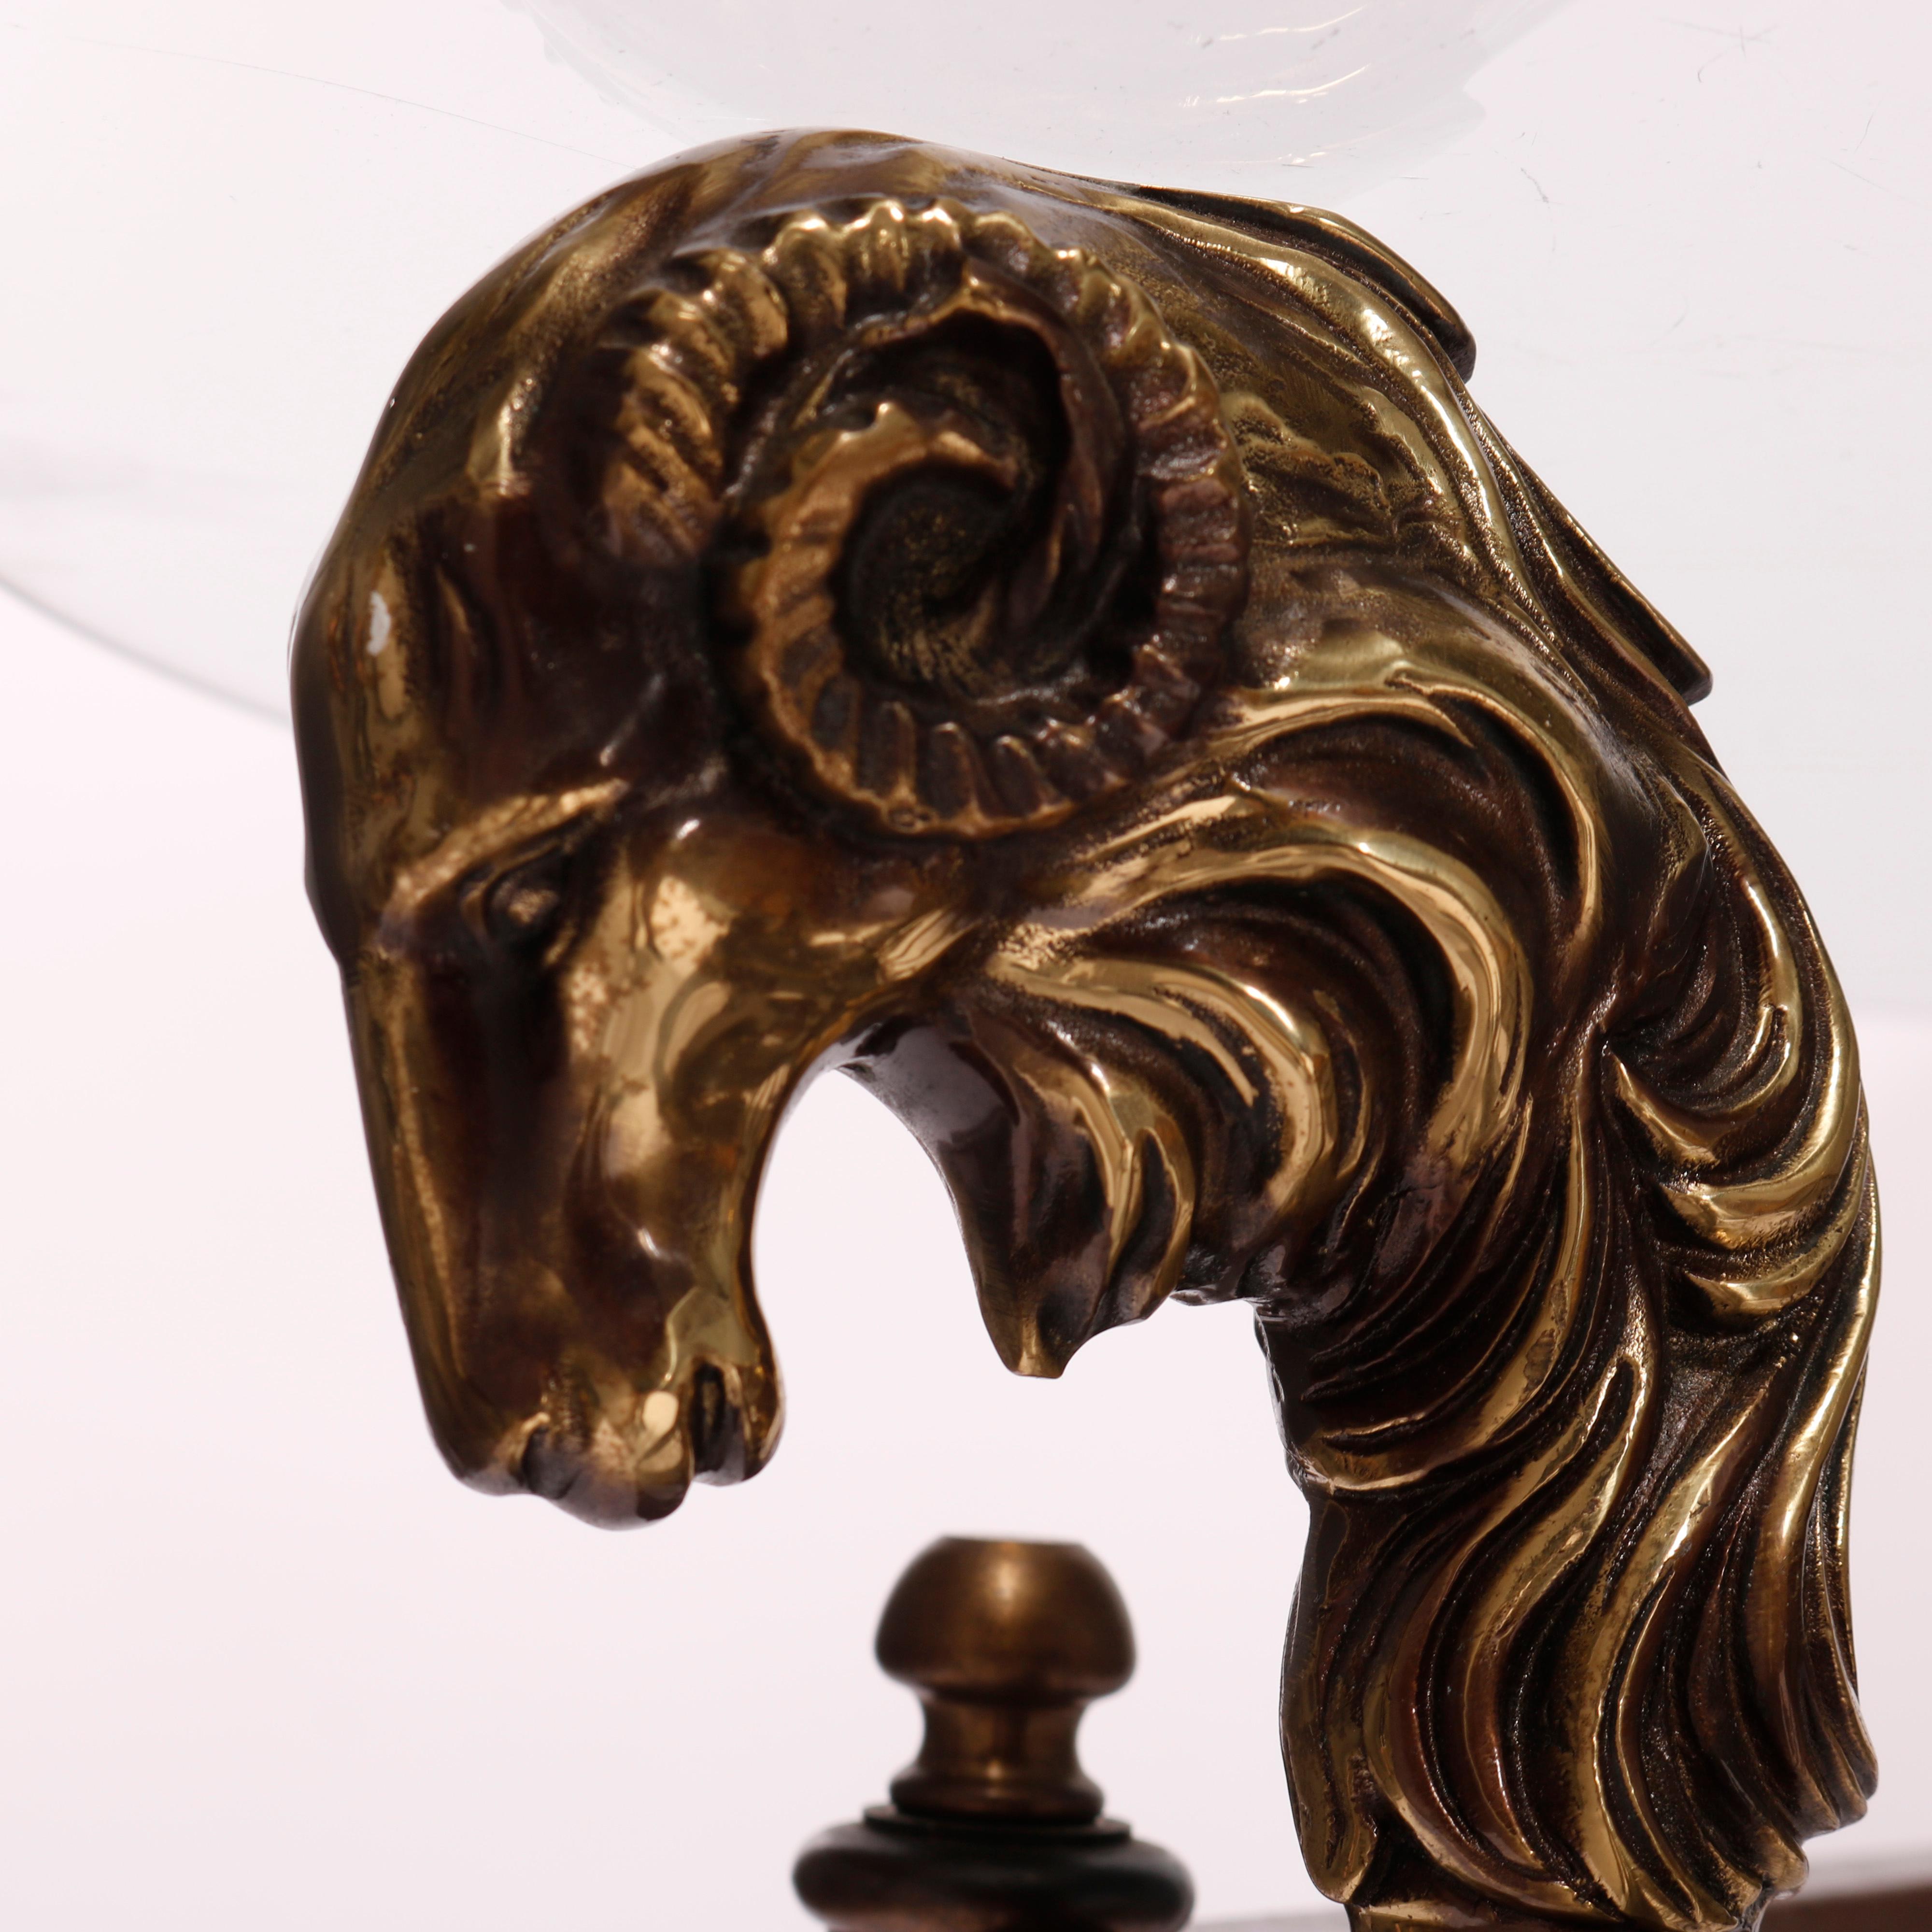 French Empire Figural Bronzed Metal & Glass Center Table with Ram's Heads 20th C For Sale 1